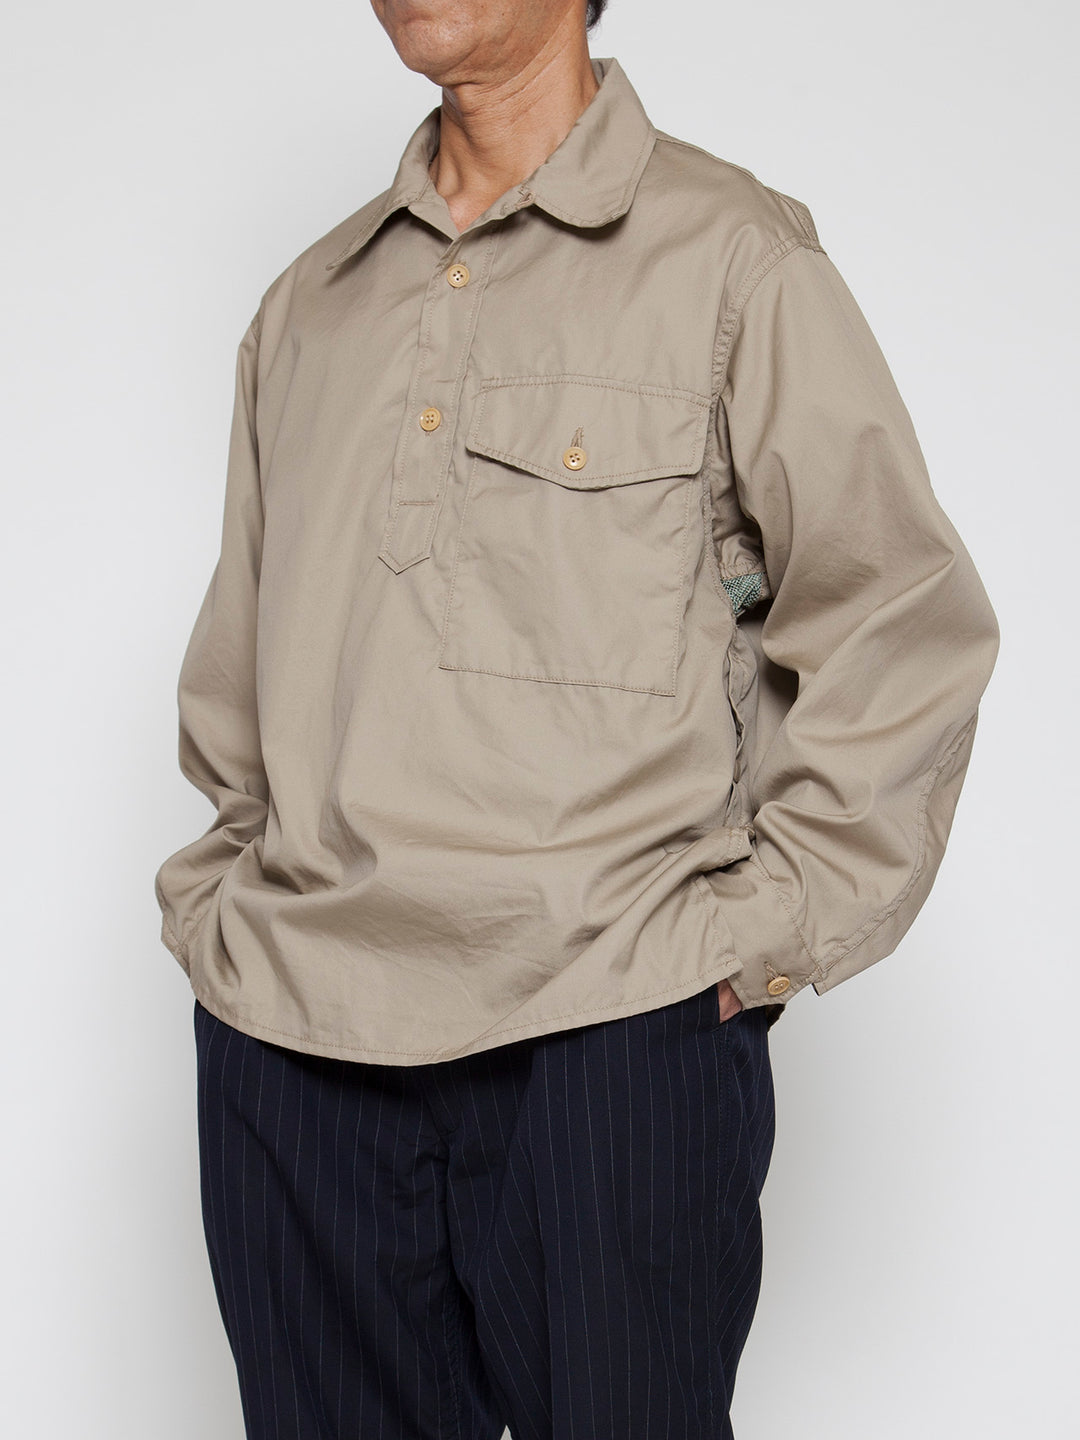 【DELIVERY】CS008 - UTILITY PULLOVER STREAM SHIRT